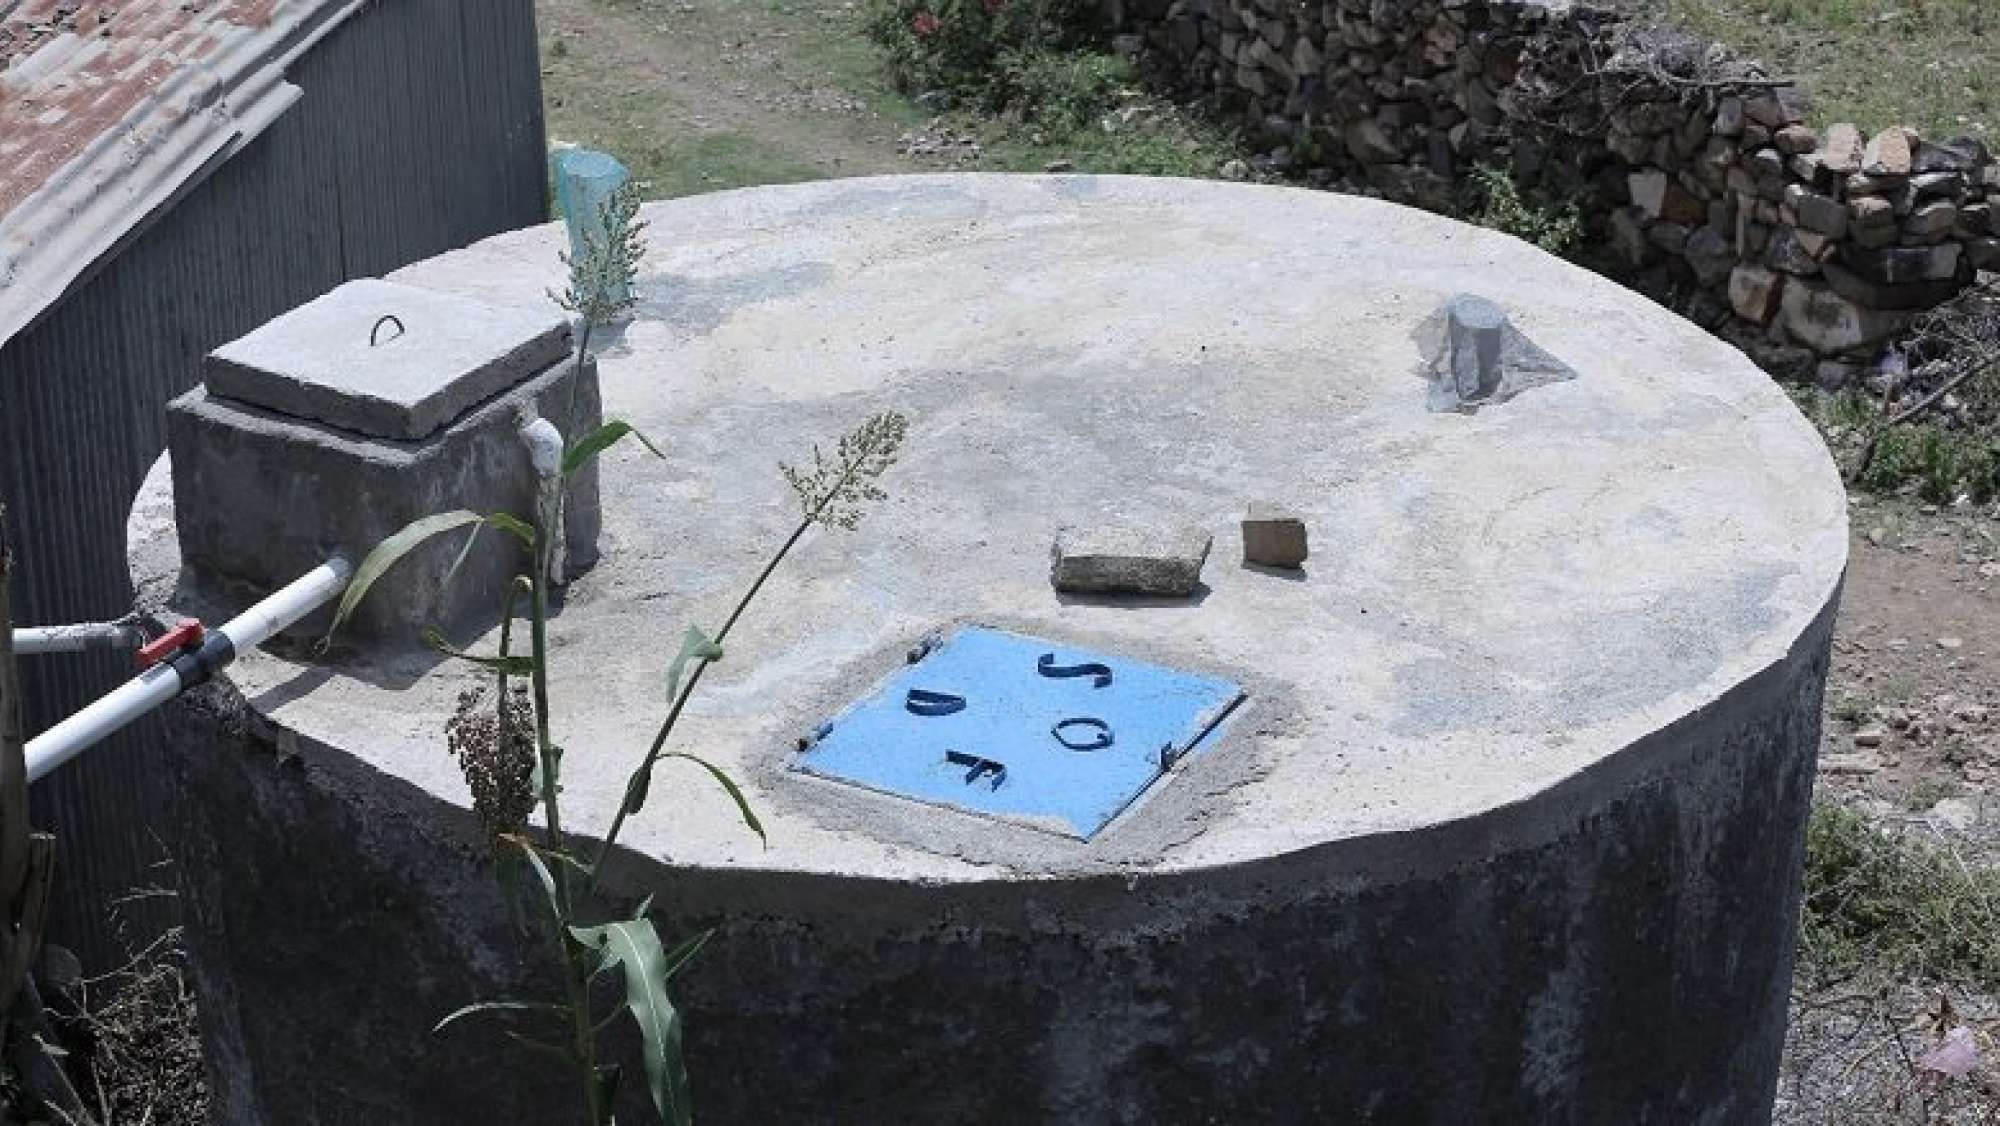 Rainwater harvesting tank made from locally available materials in Yemen